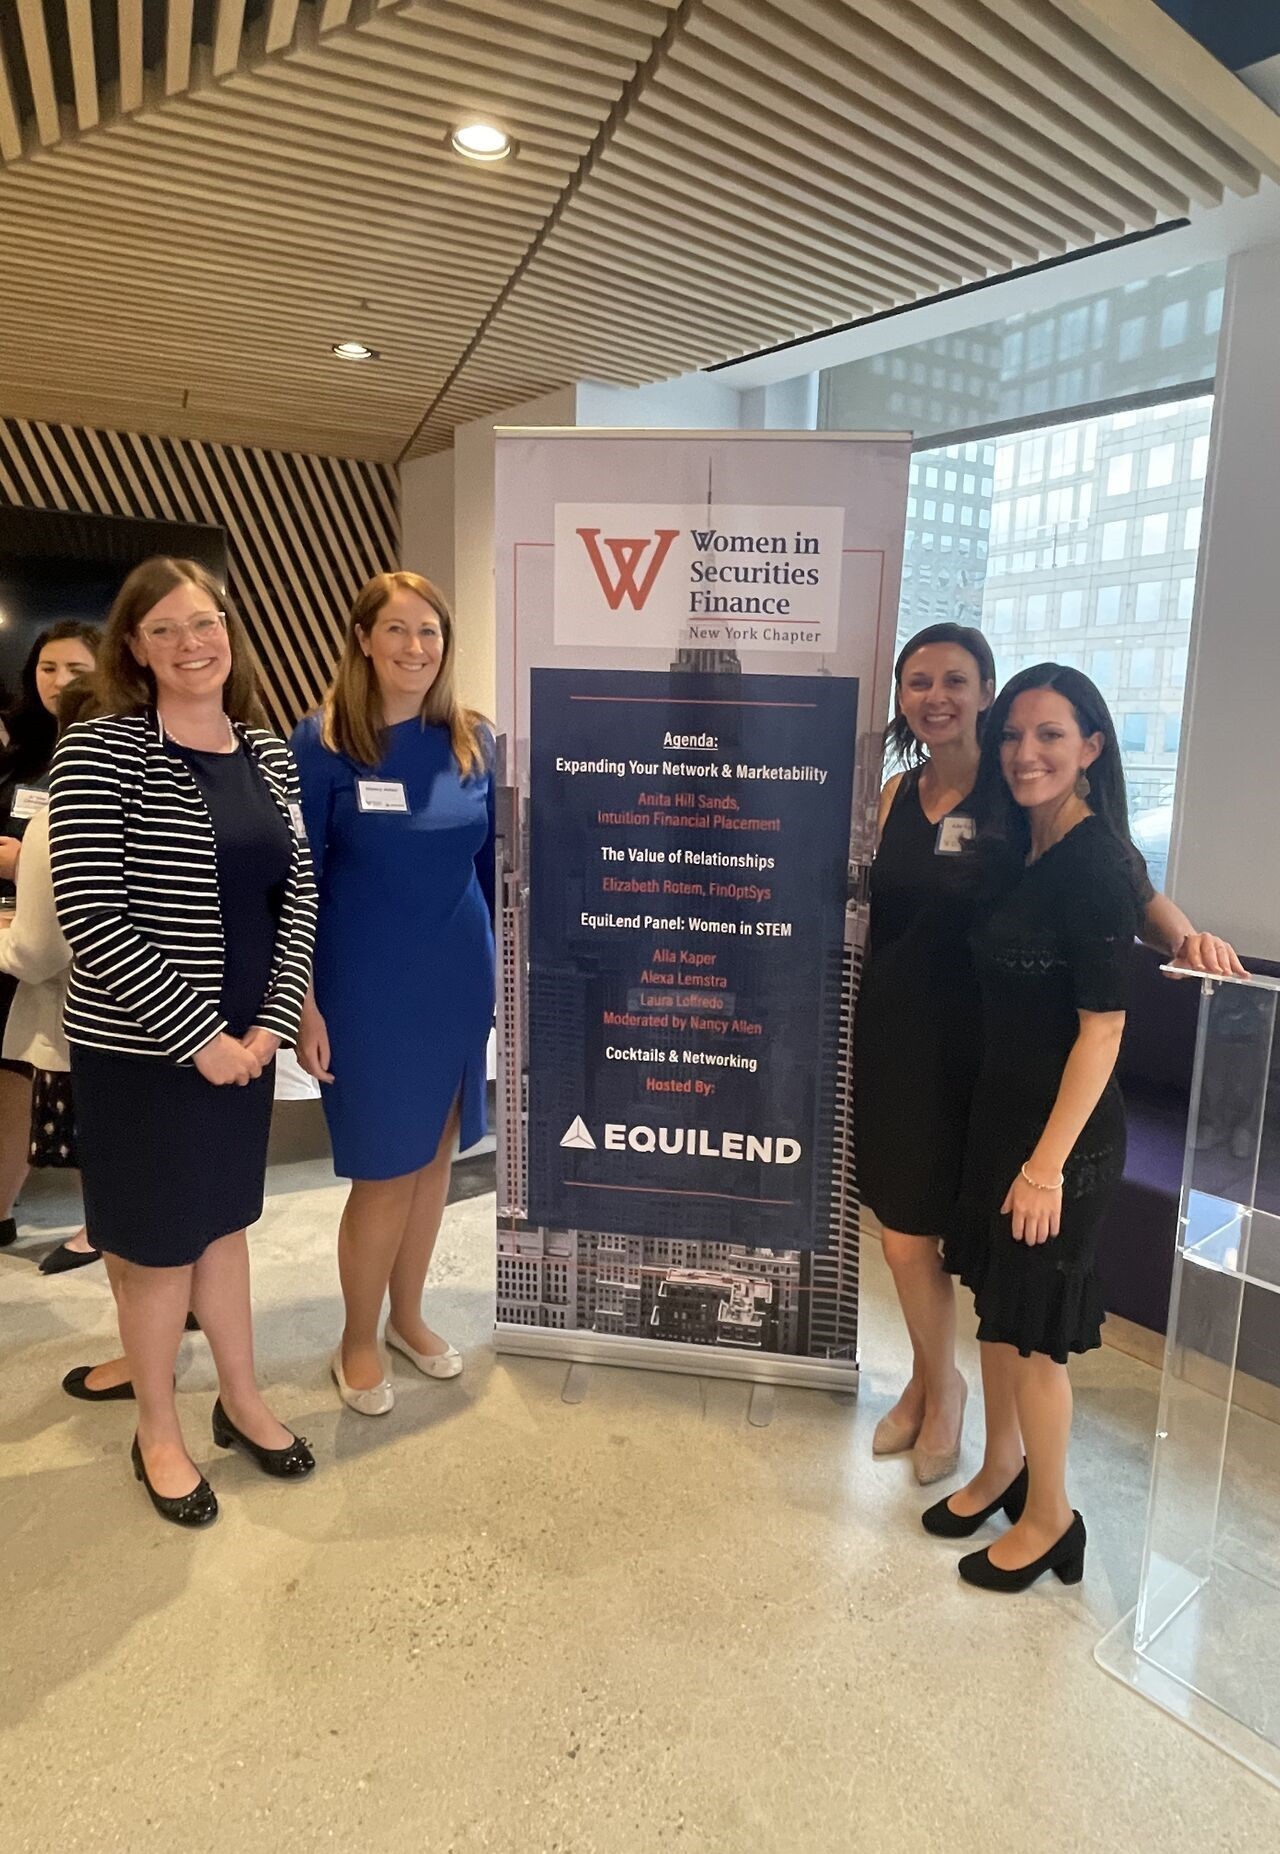 In 2022, EquiLend hosted an event in partnership with Women in Securities Finance. EquiLend's panelists are shown here.